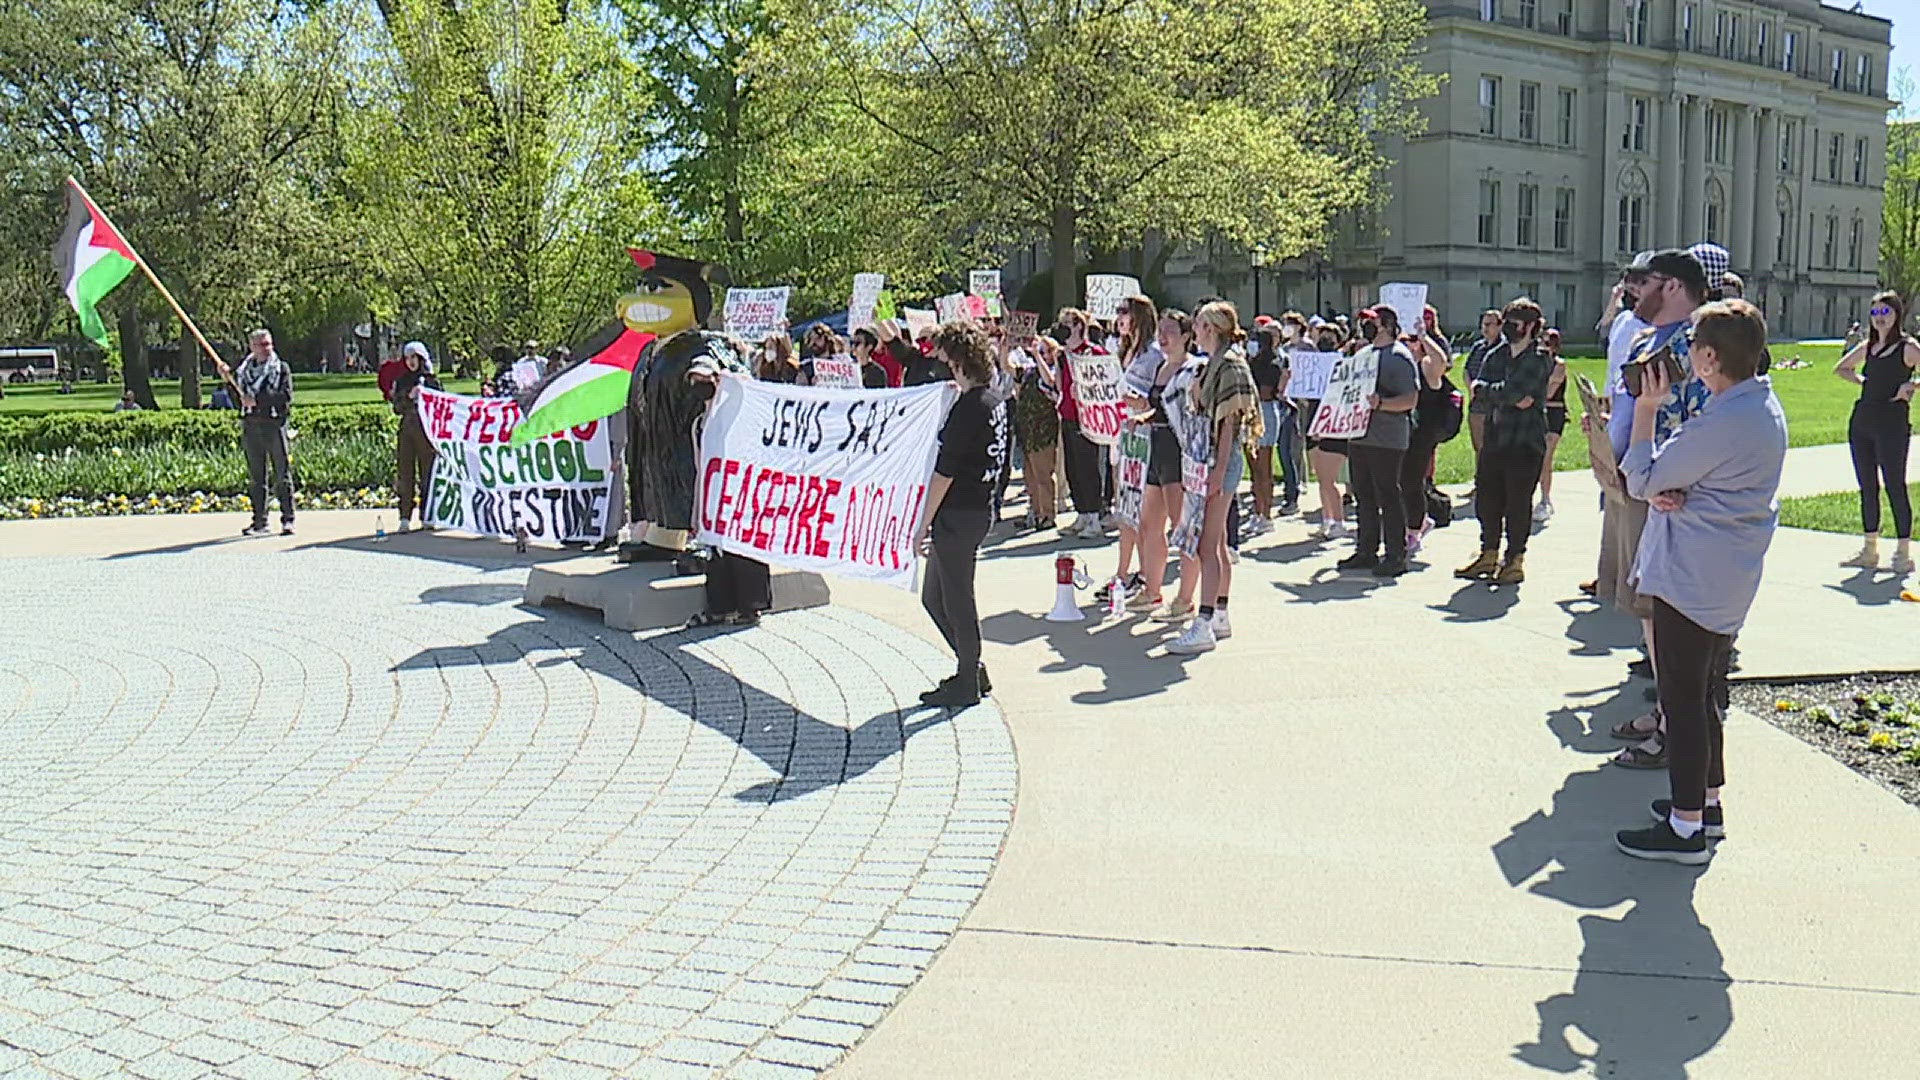 It comes amidst a wave of nationwide demonstrations on college campuses protesting the war in Gaza.